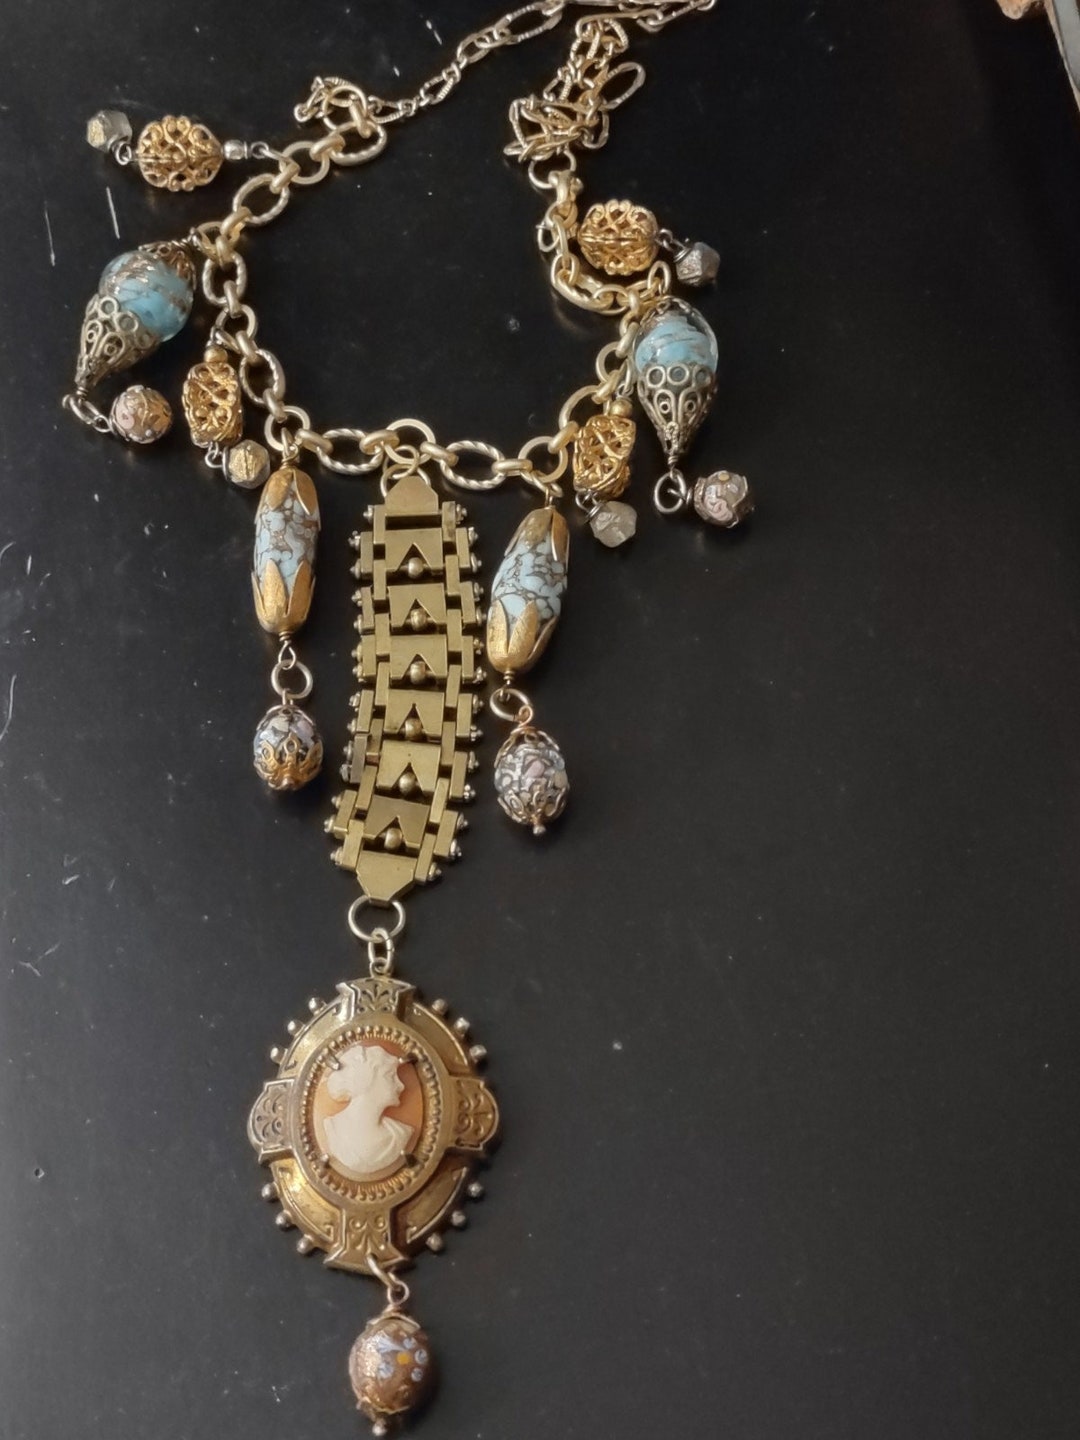 Vintage Cameo and Articulated Brass Watch Chain Assemblage Necklace - Etsy